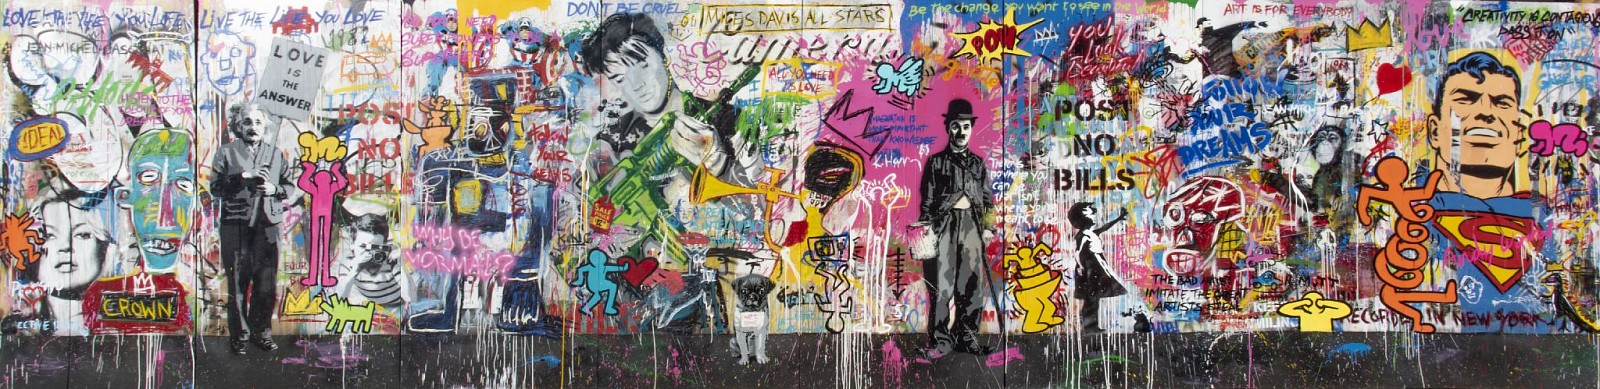 Mr. Brainwash, 8-Panel Mural, 2016
Stencil and Mixed Media on Multiple Wood Panels, 96 x 384 in.